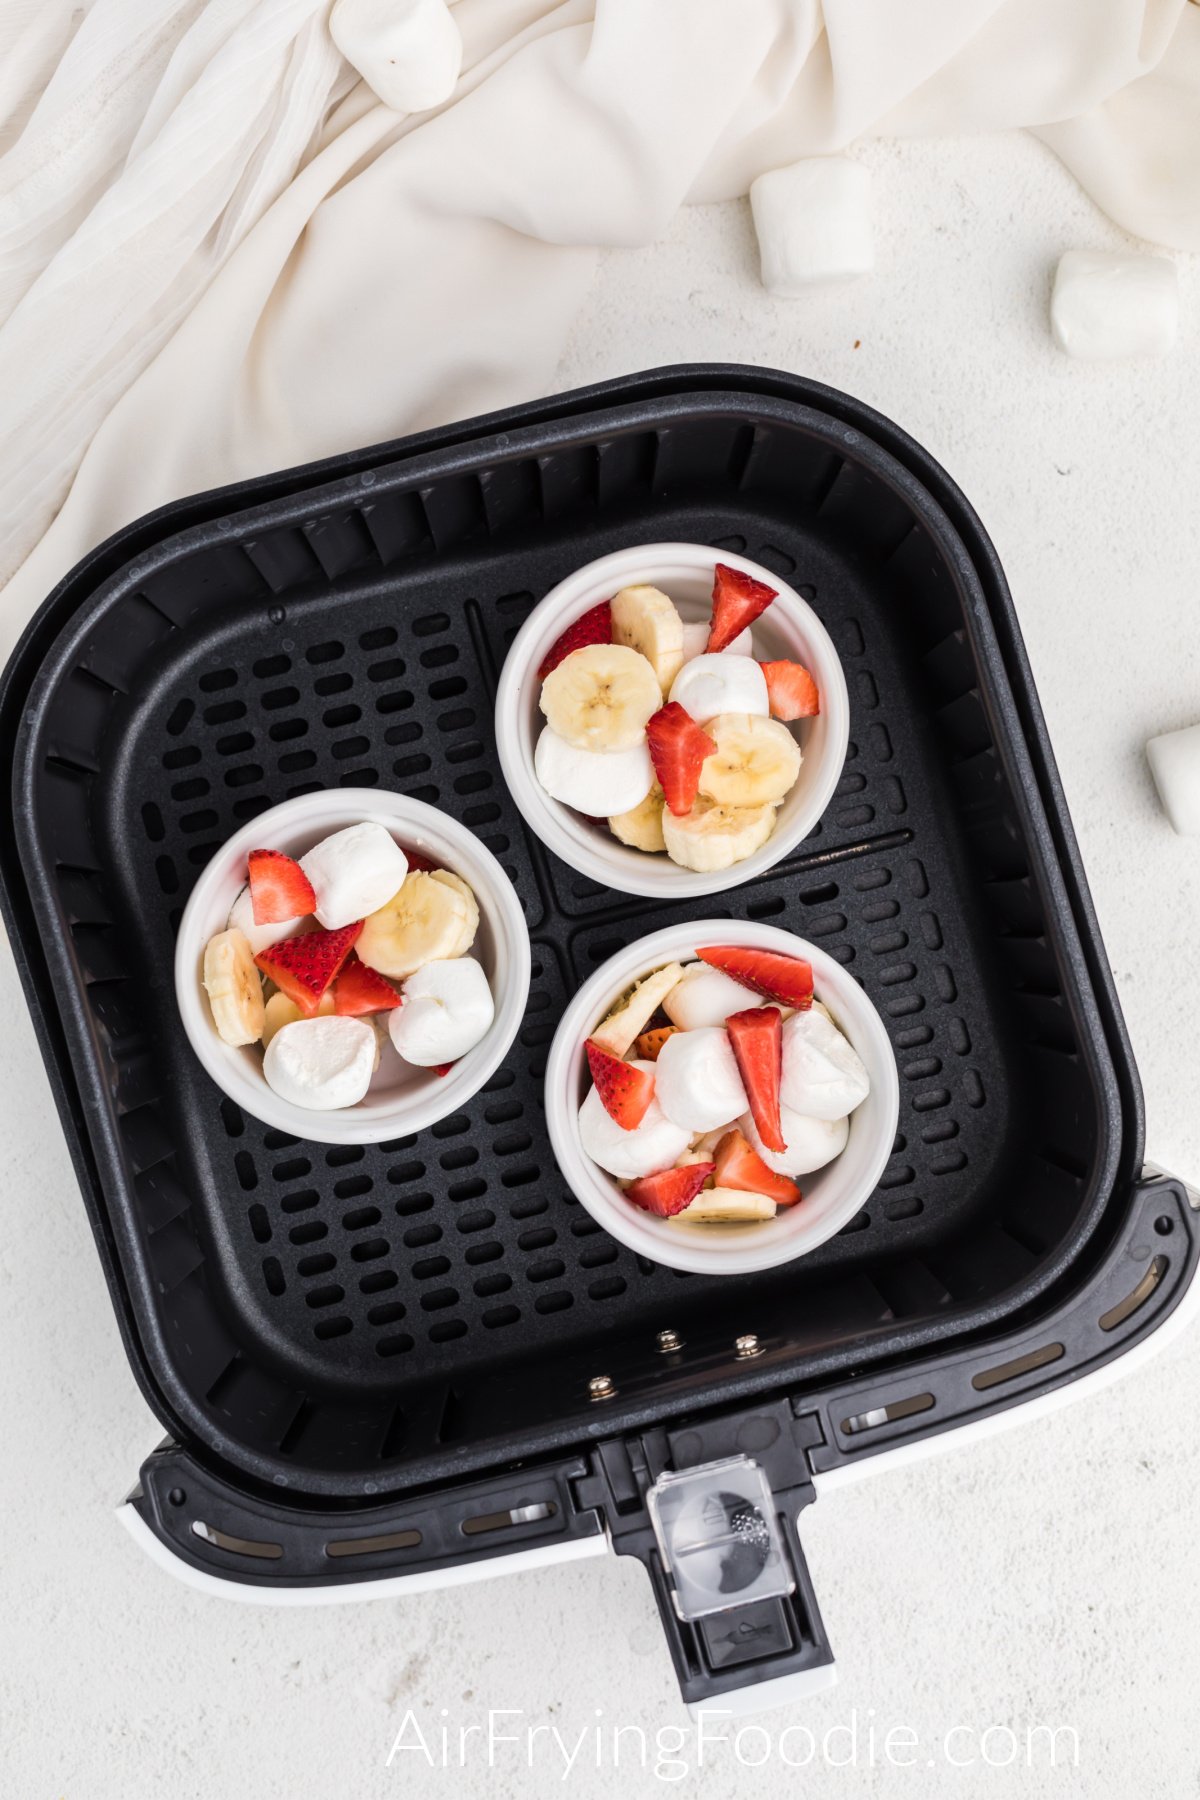 Air fryer strawberry banana bowls in the basket of the air fryer ready to cook.